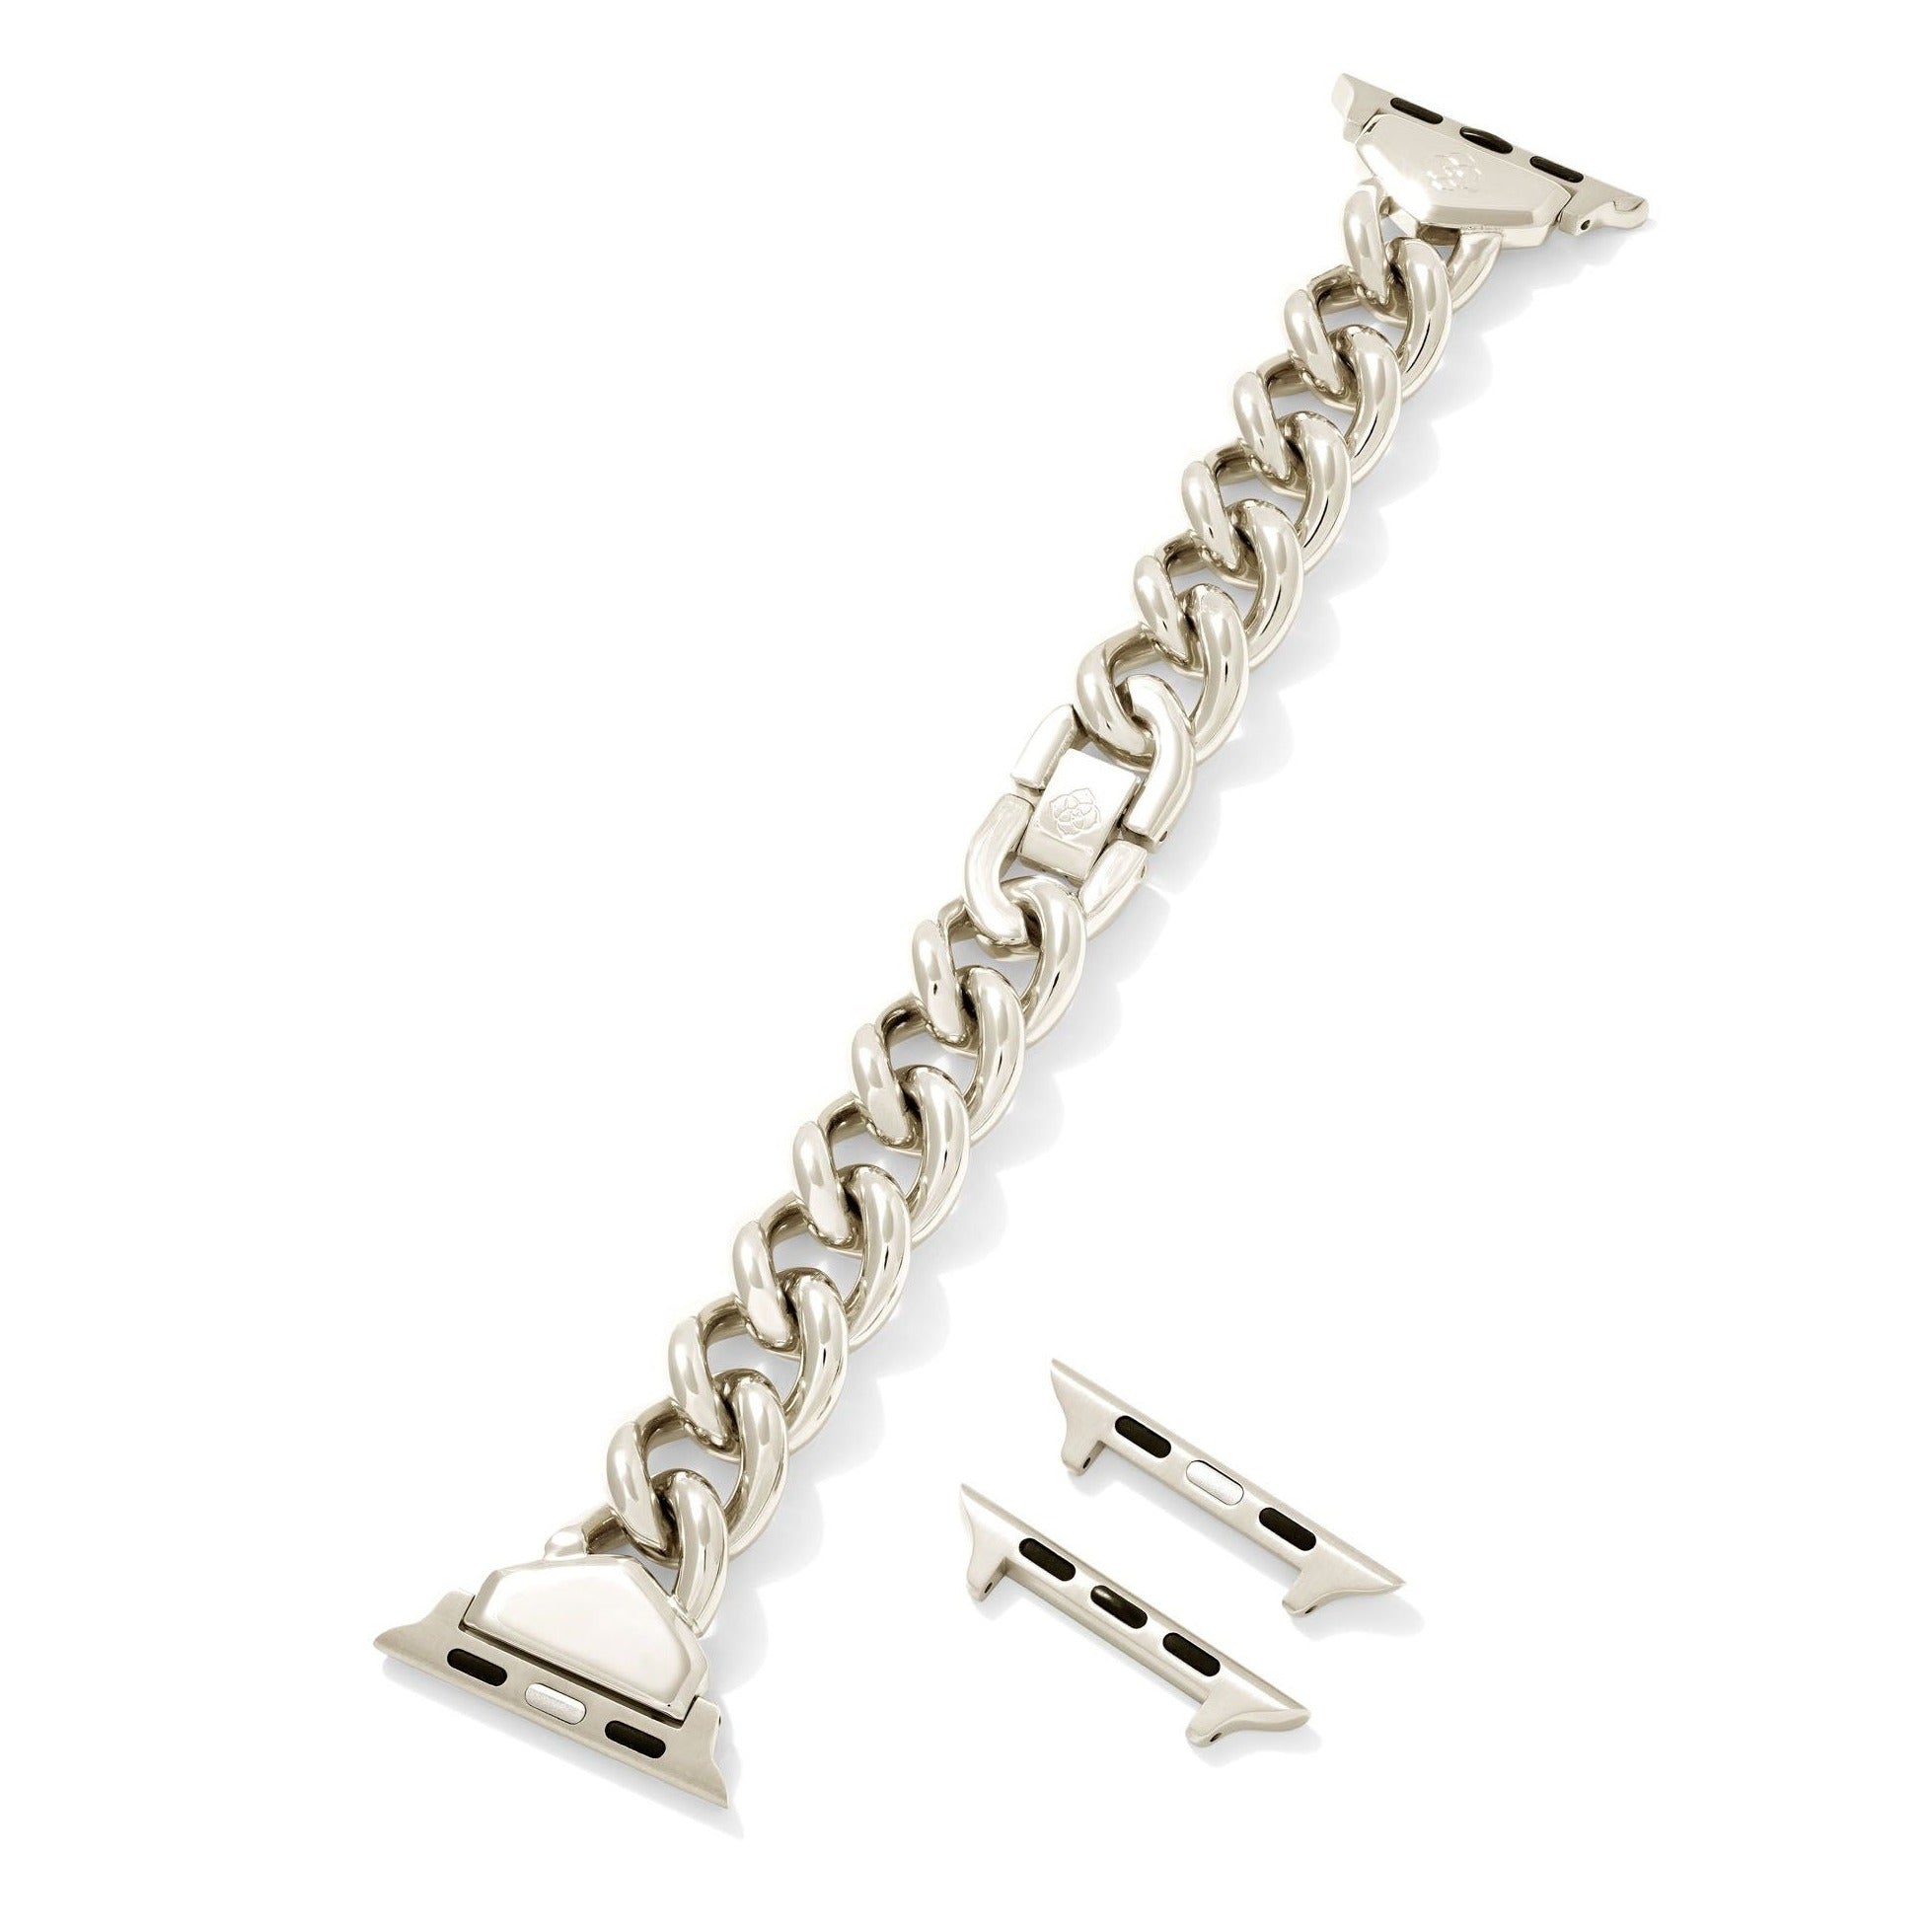 Kendra Scott | Whitley Chain Watch Band in Stainless Steel